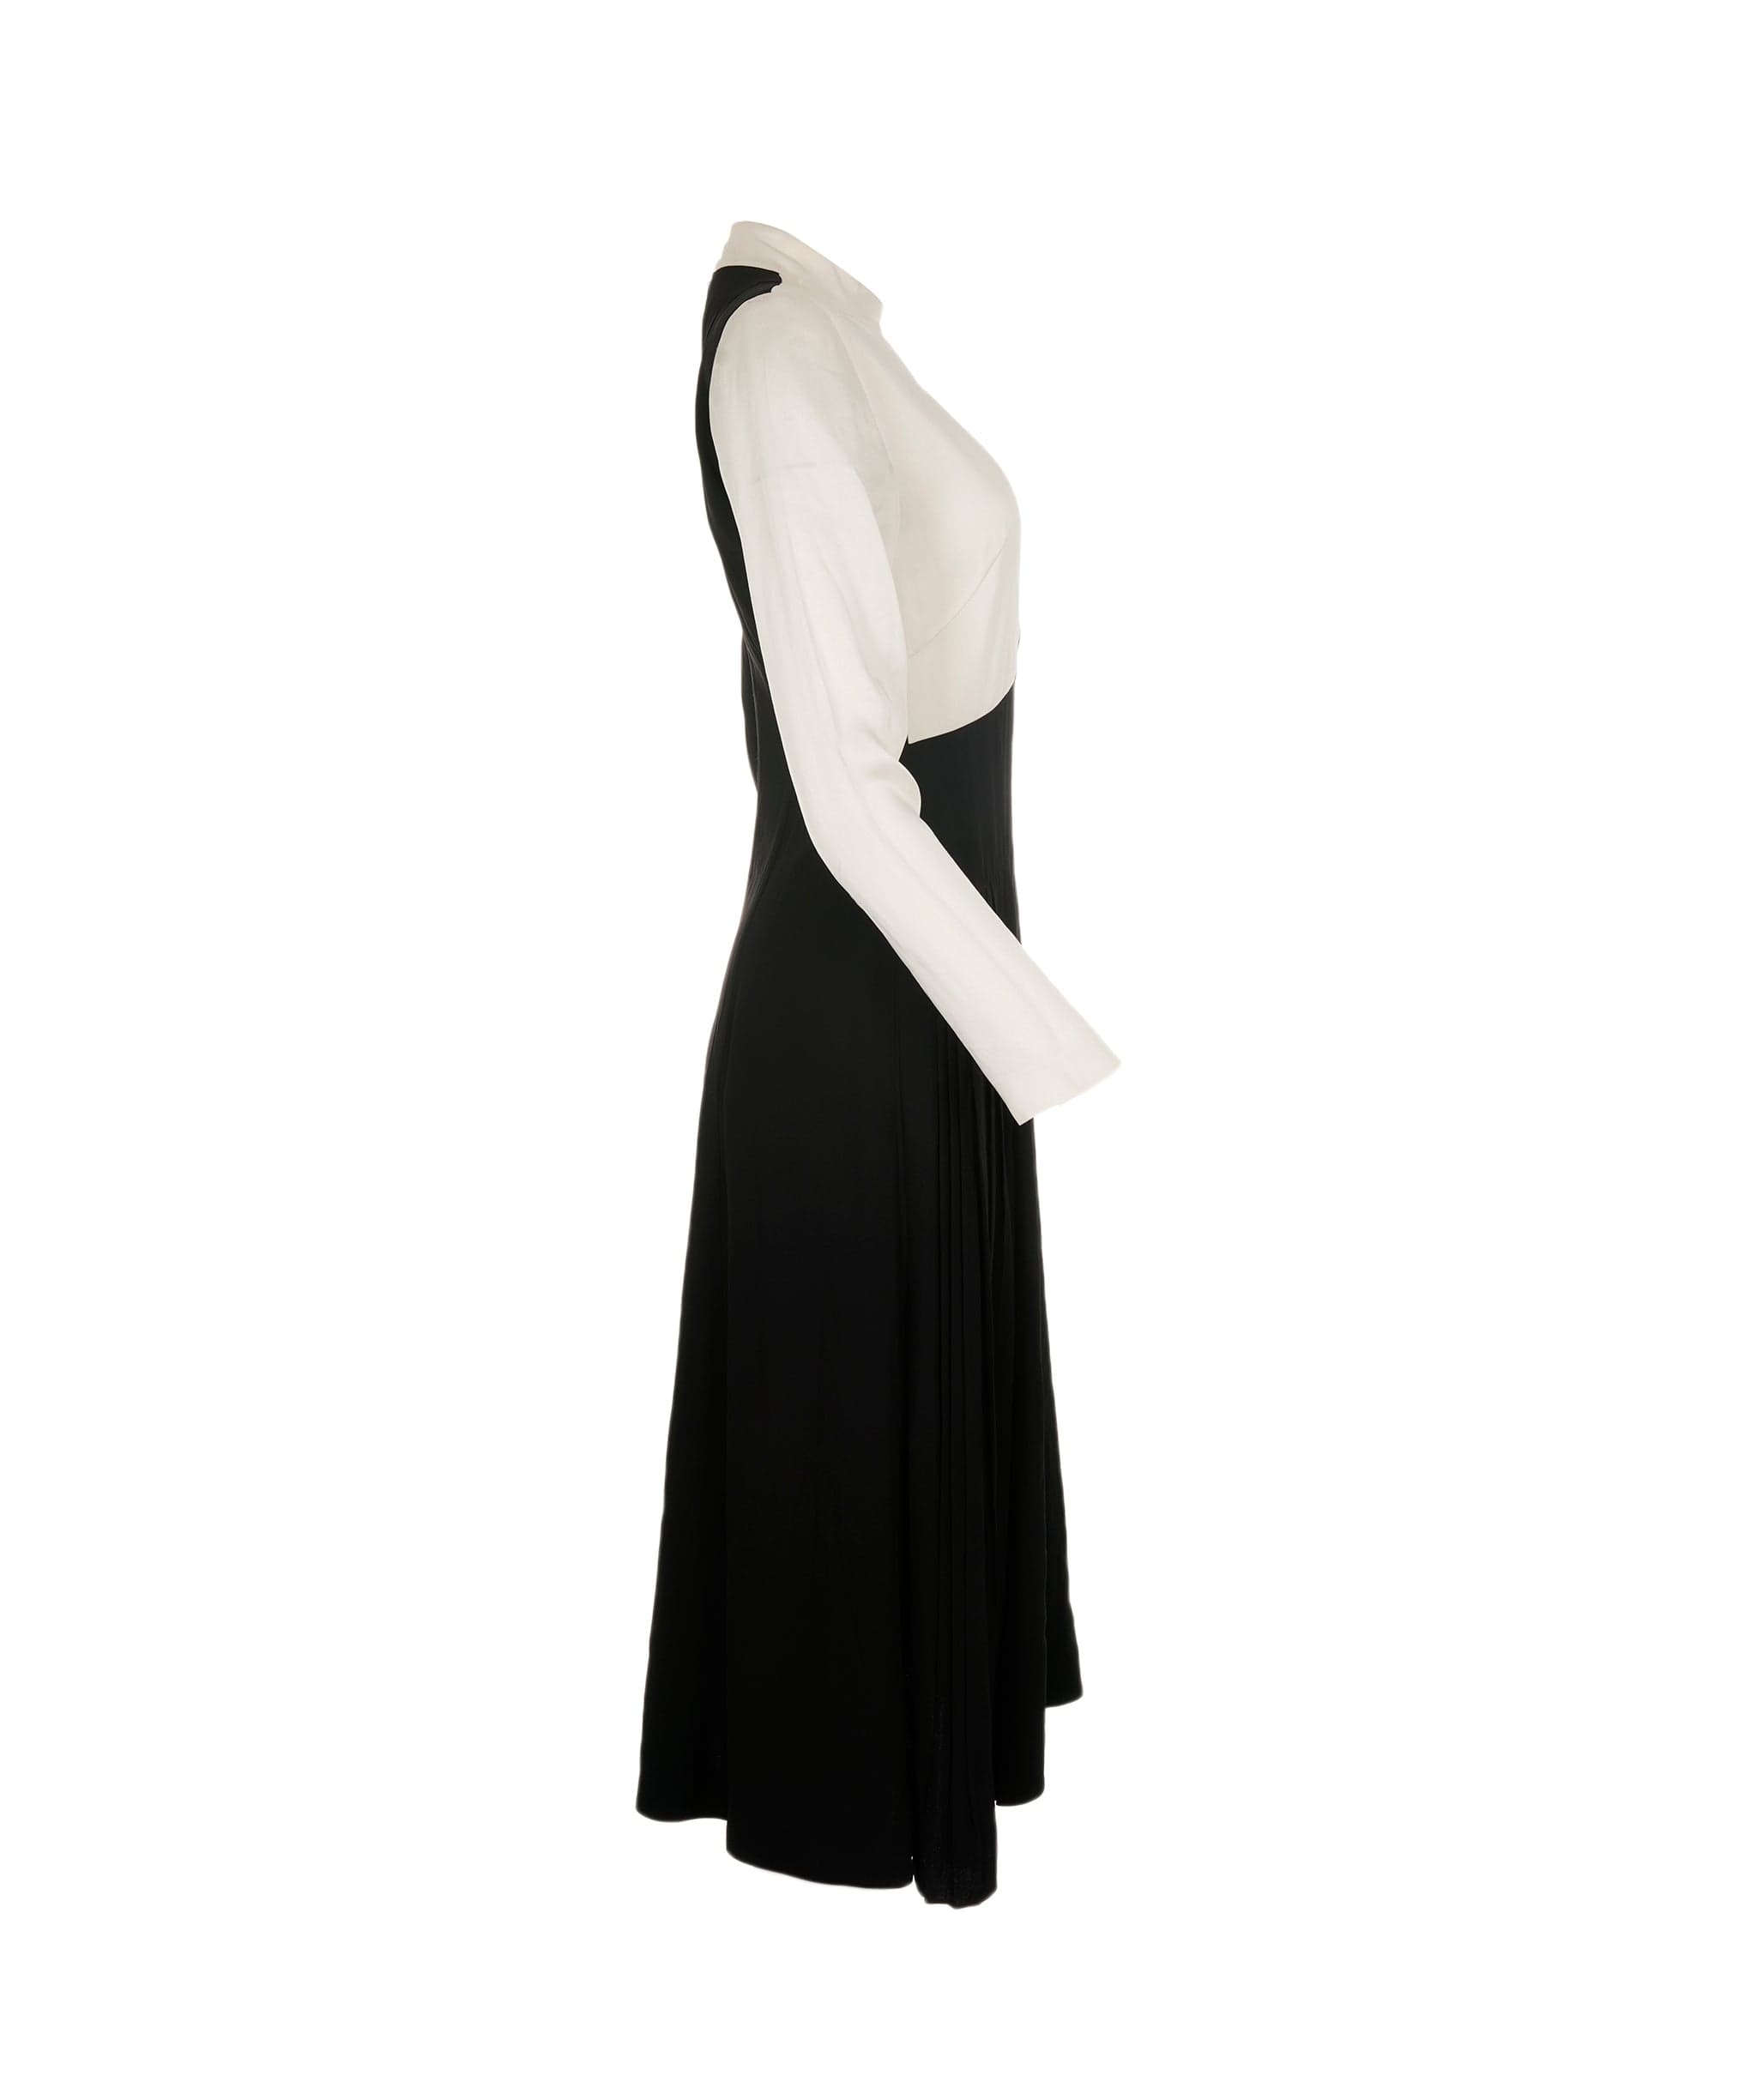 Givenchy Givenchy black and white king dress, size 36 AEL1127